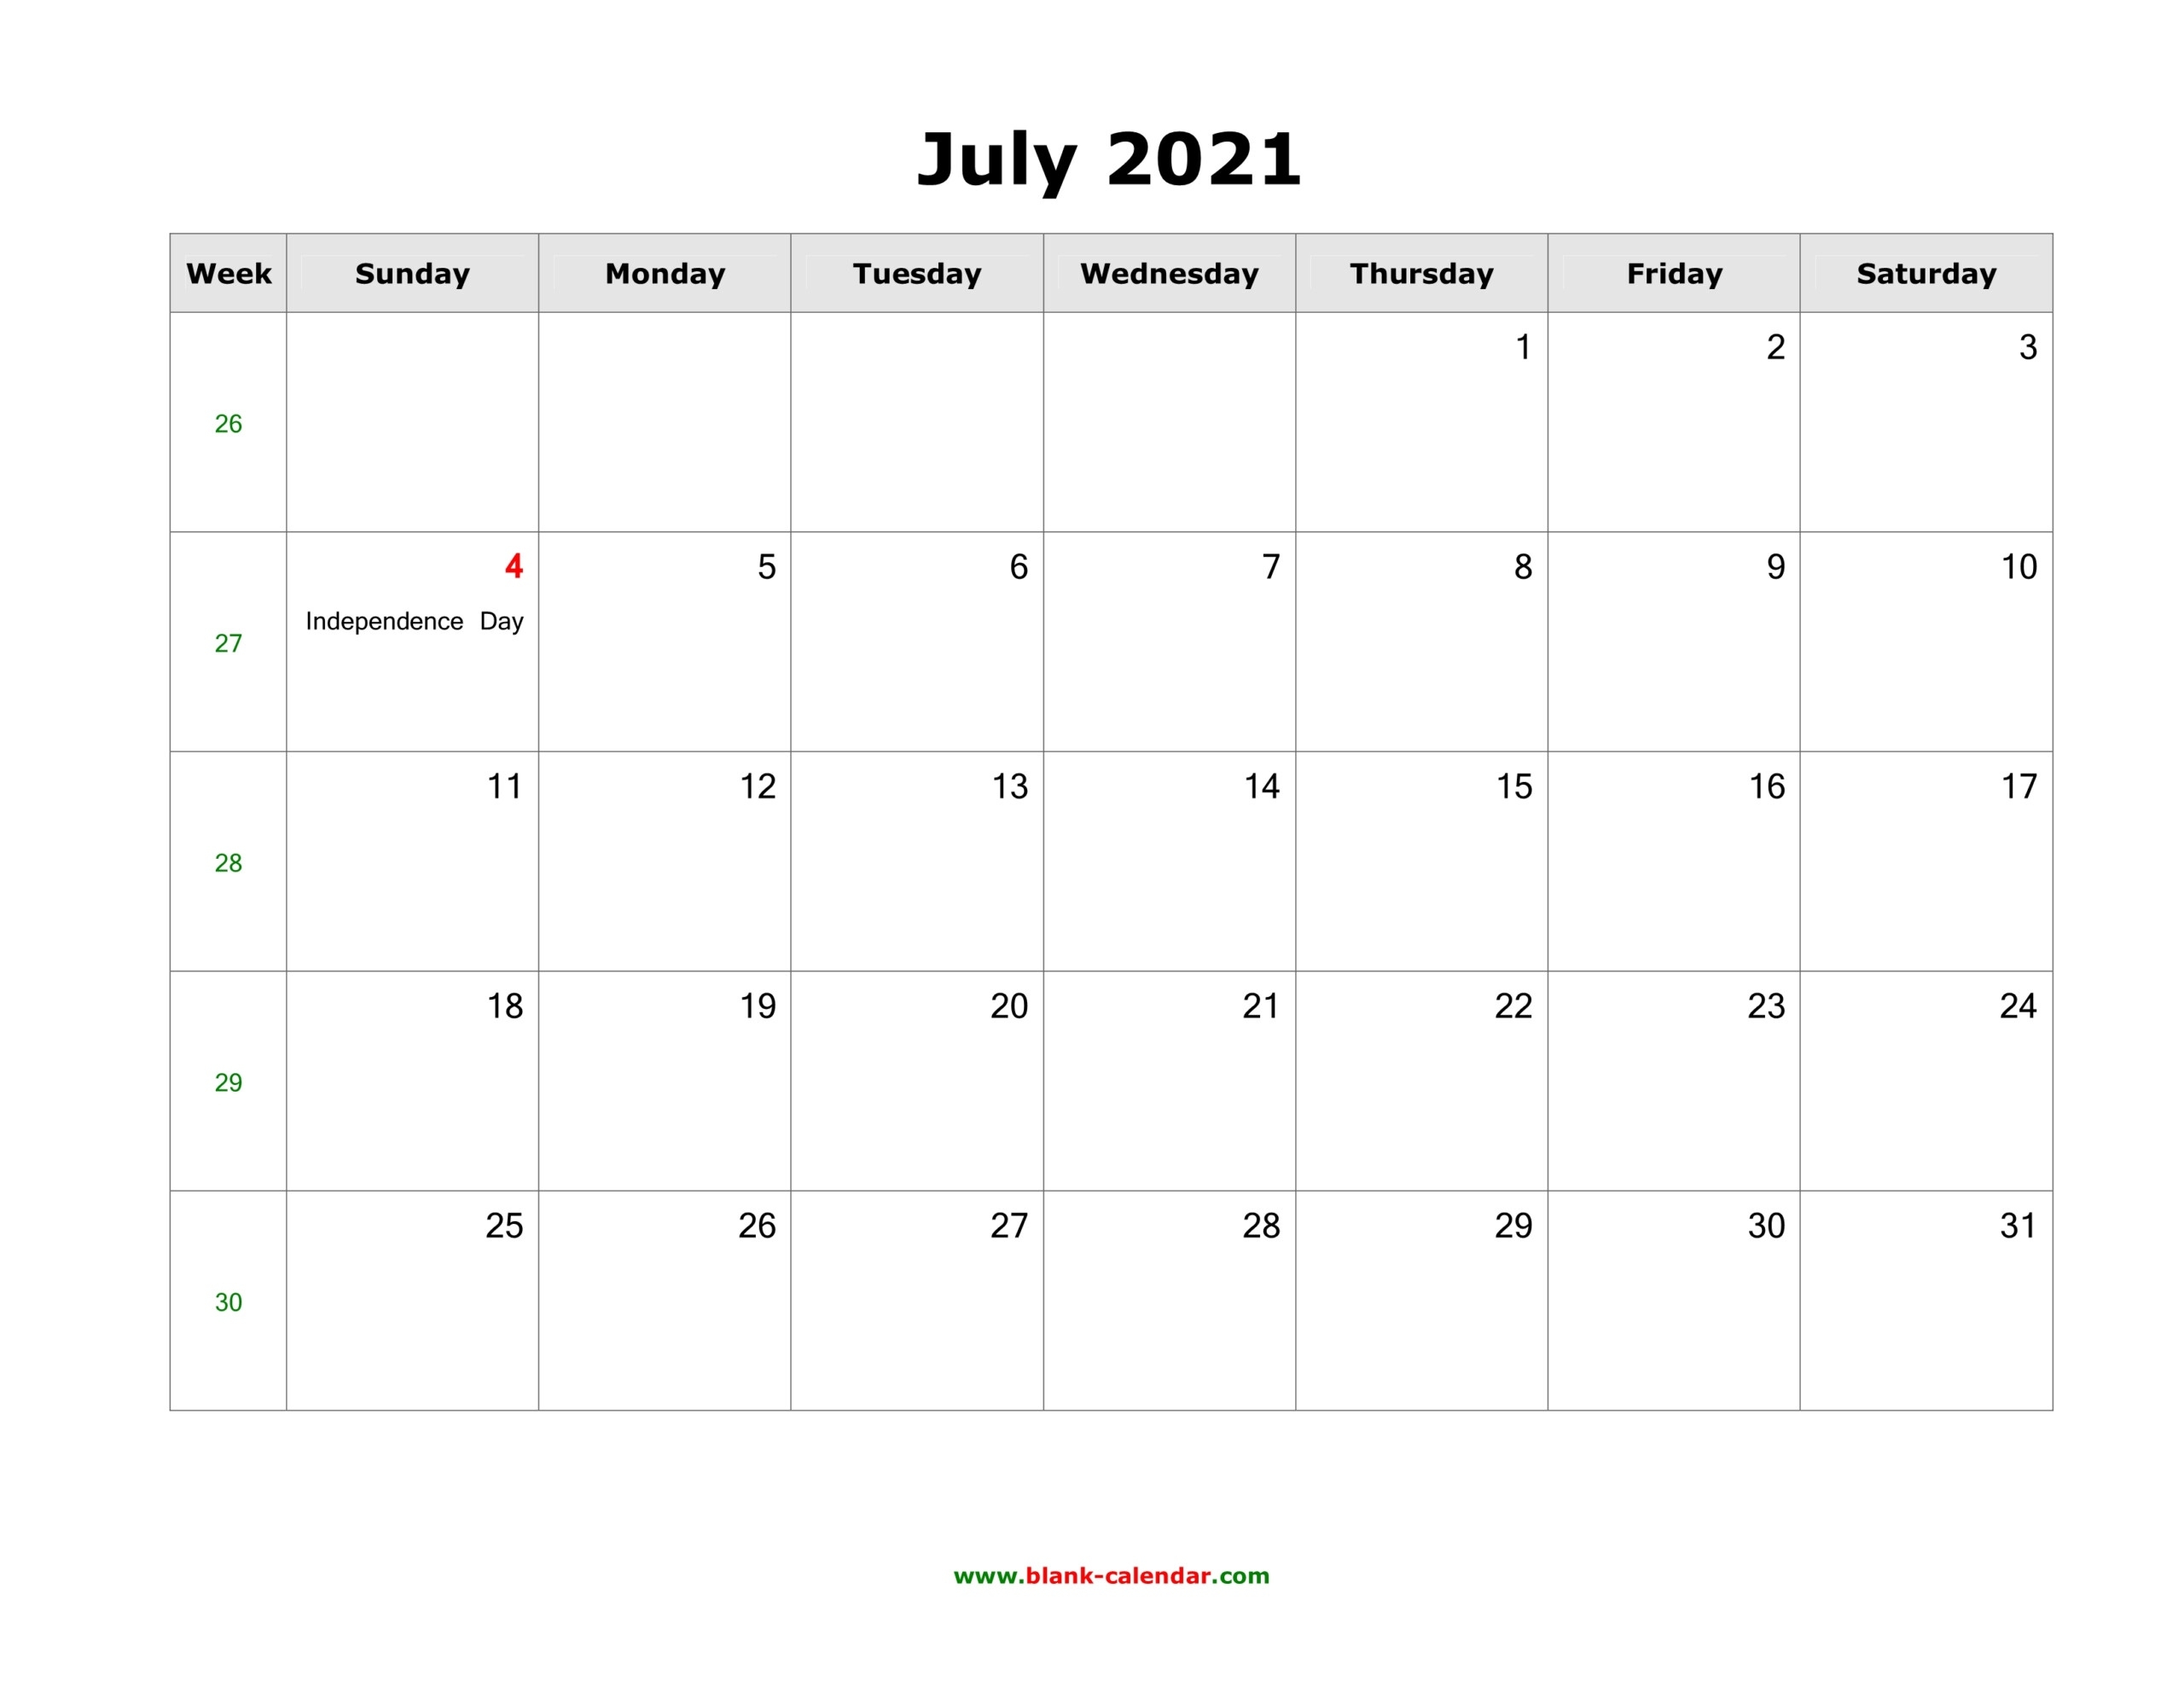 Printable Monthly Calendar July 2021 To June 2021 | Free 2021 Printable Calendars July 2020 - December 2021 Calendar